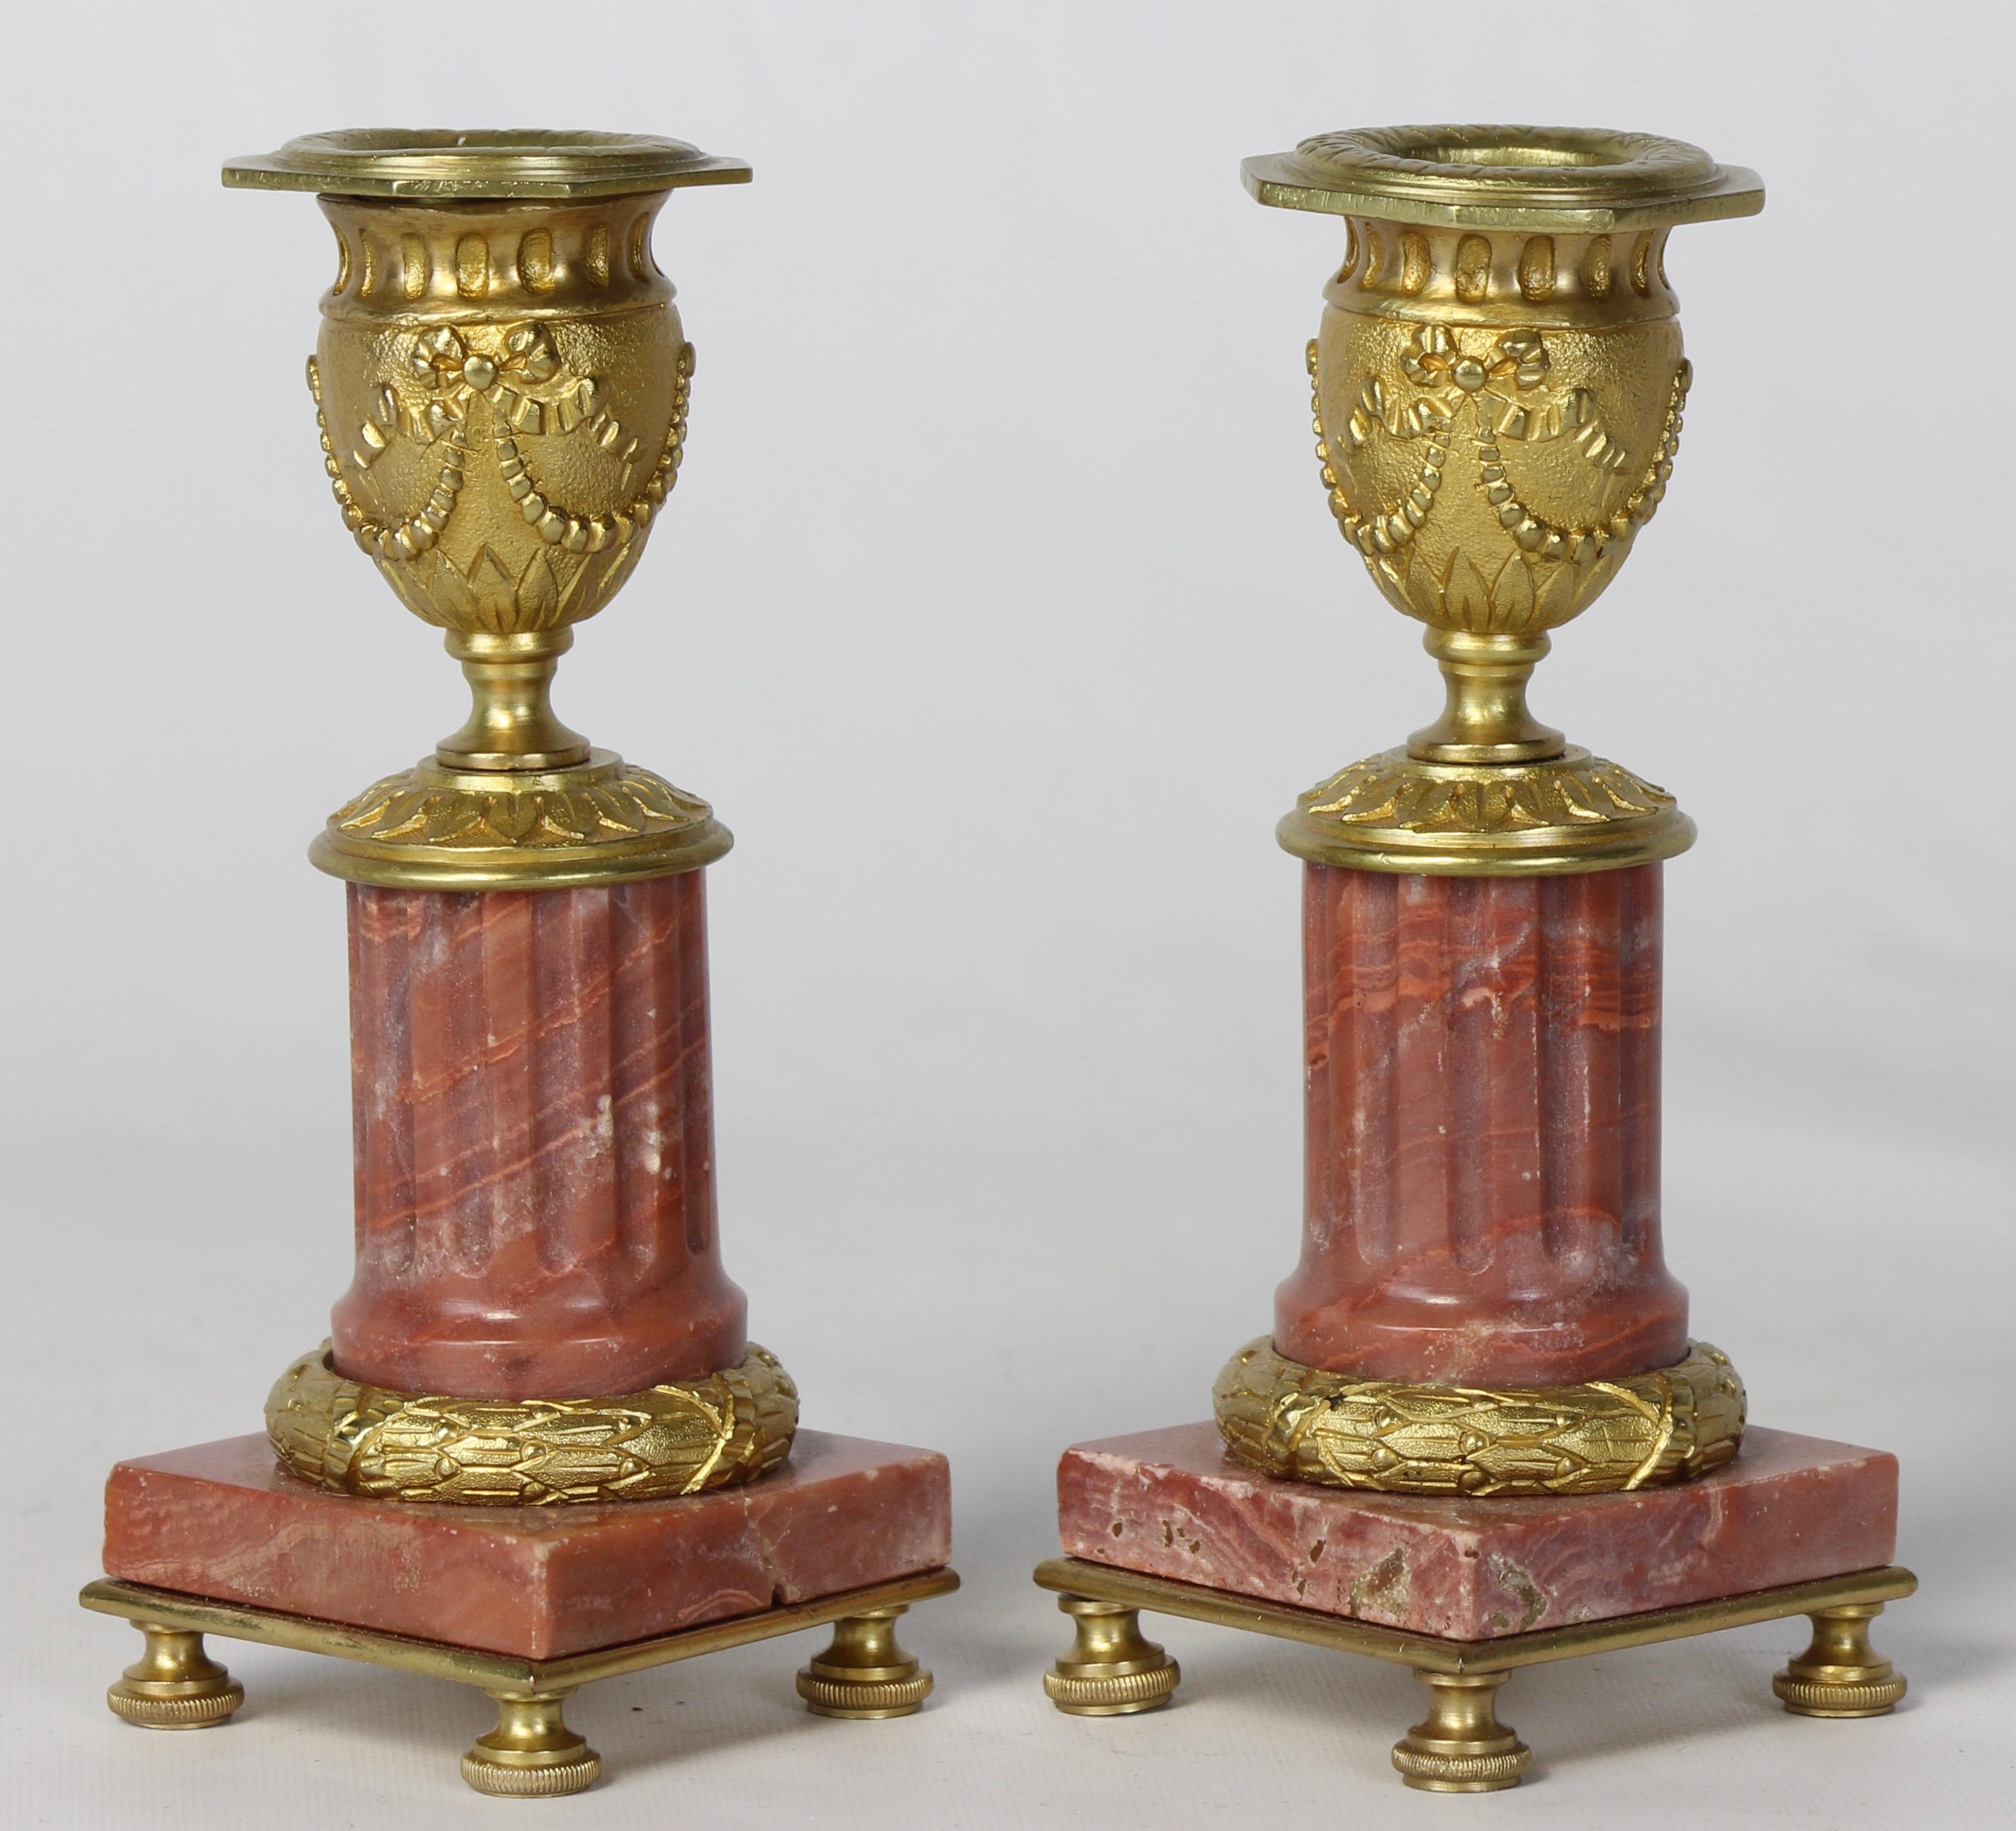 Pair of French Rose Marble Neoclassical Style Candlesticks (Neoklassisch)